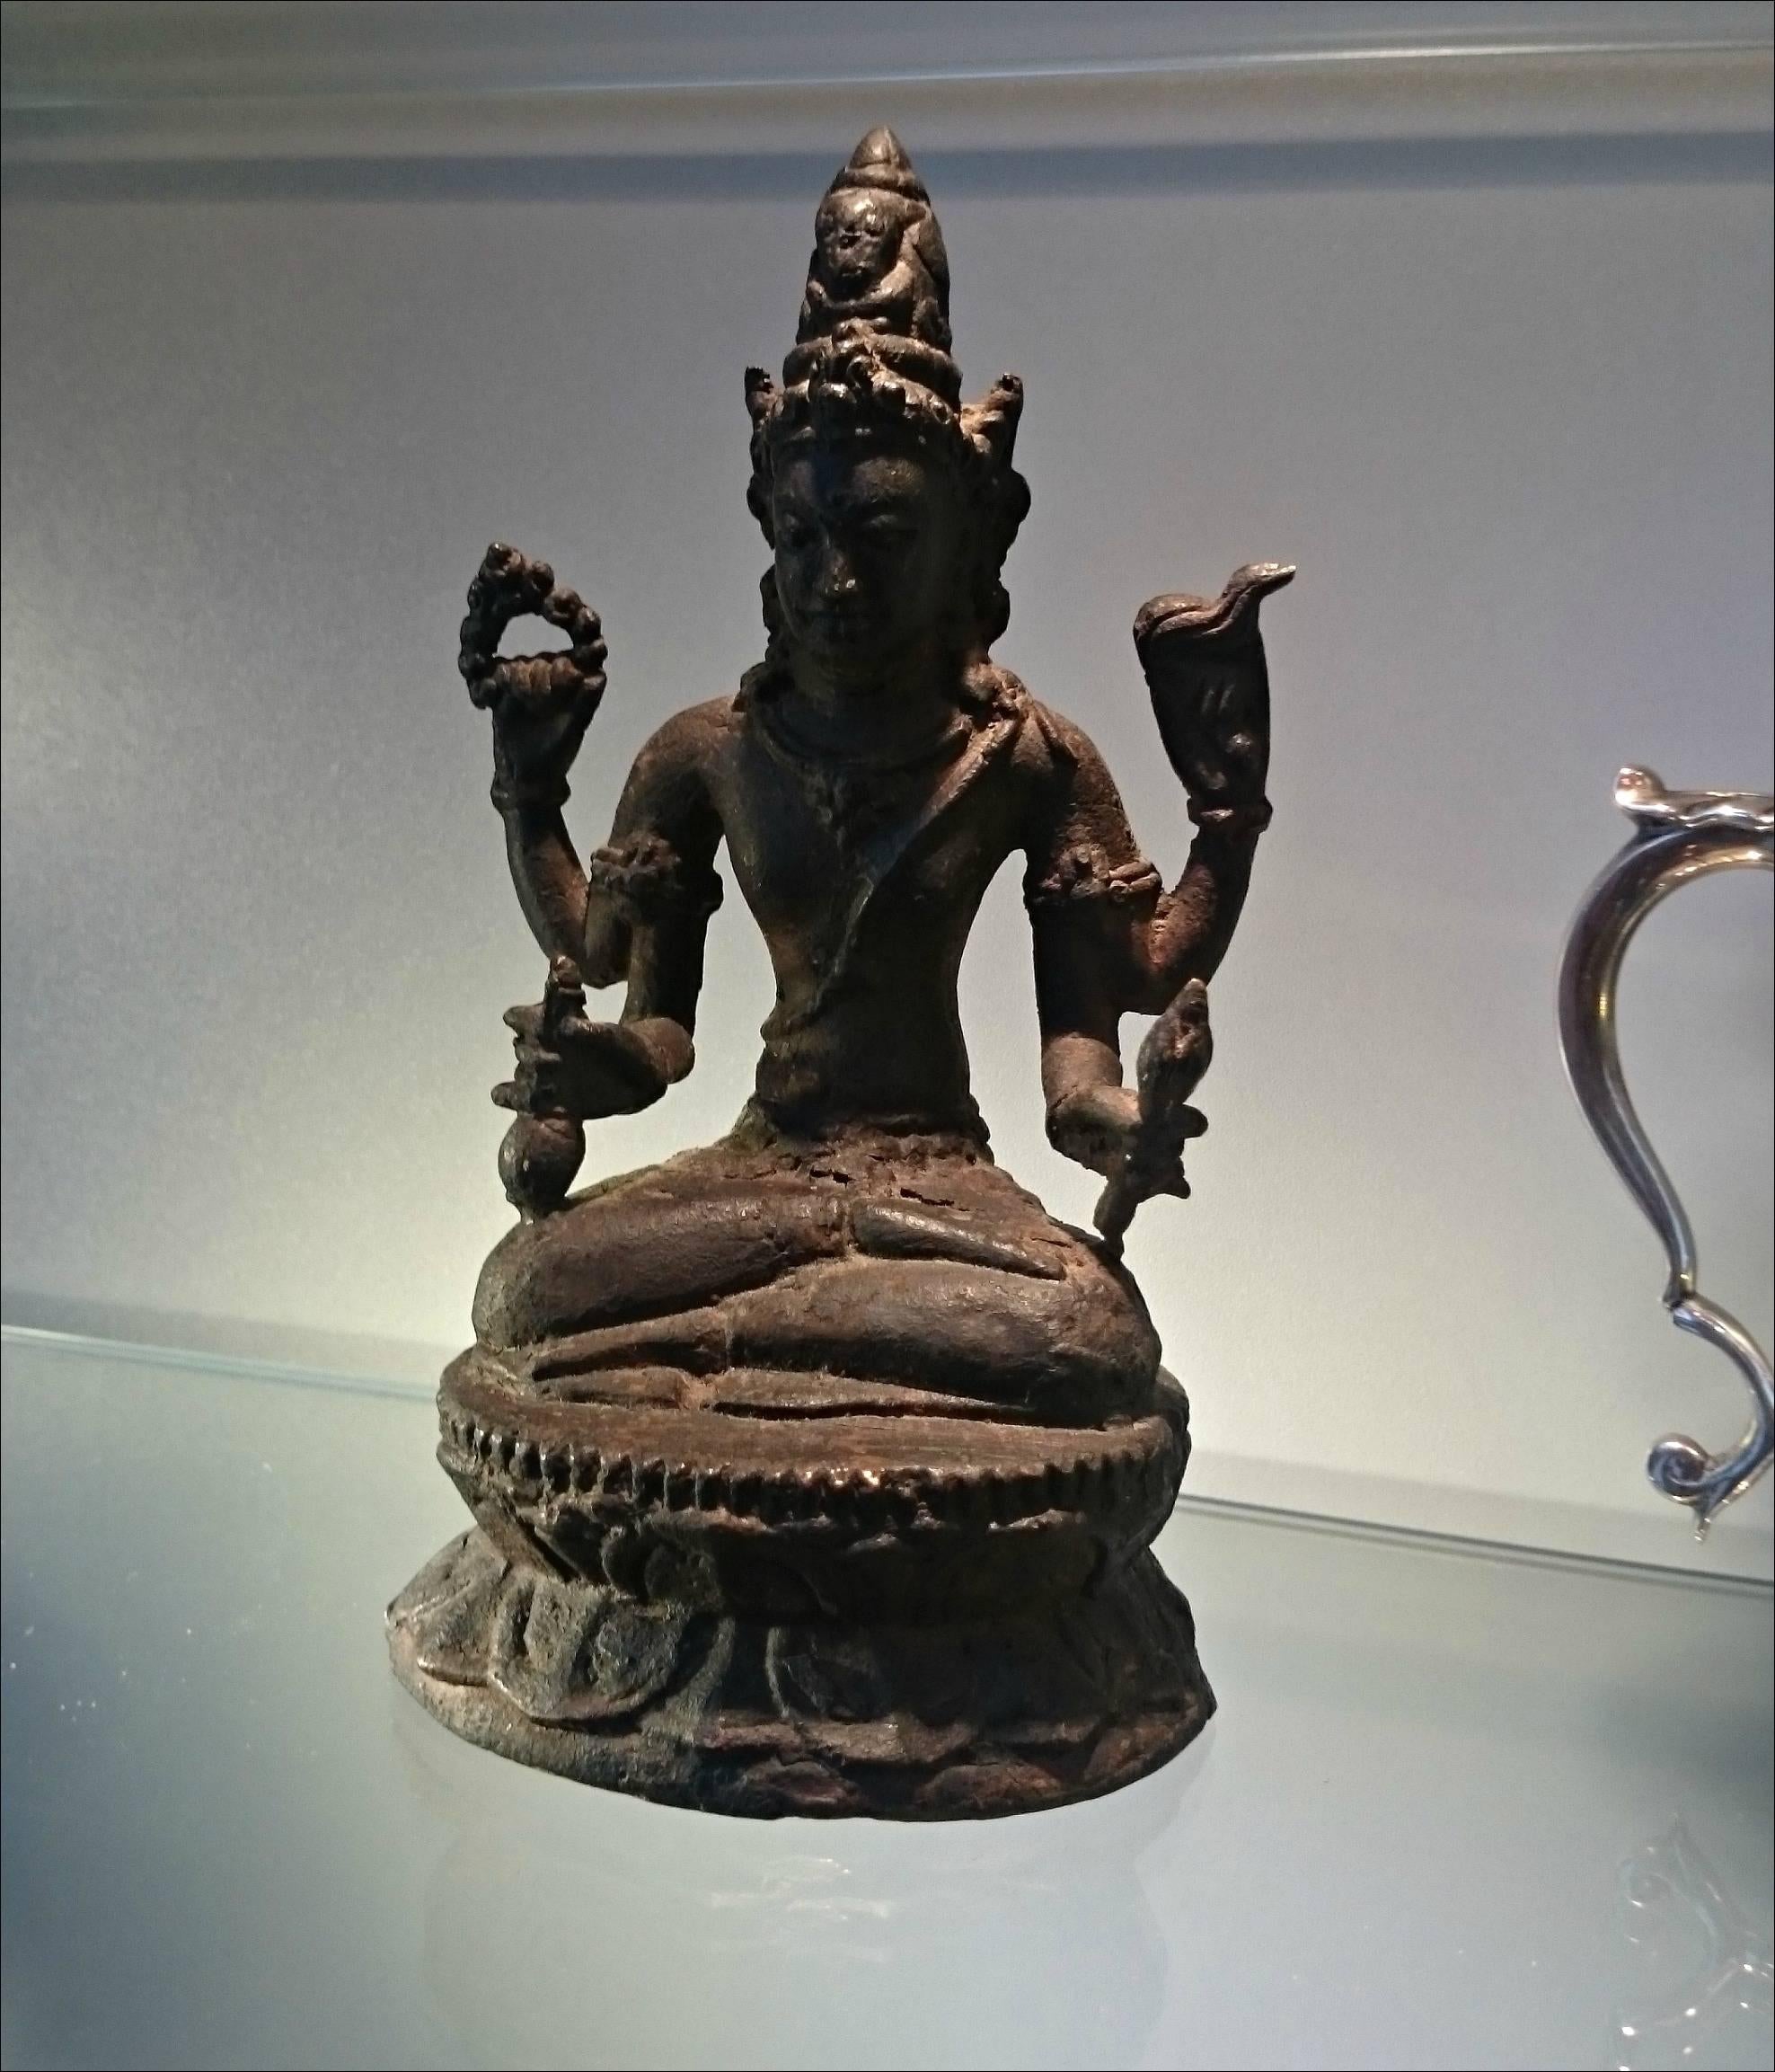 An early figure statue of Indian Shiva  
made of some cast metal may be bronze or iron.
The figure consist of four arms holding ritualistic objects, on a lotus shaped base.
    
   